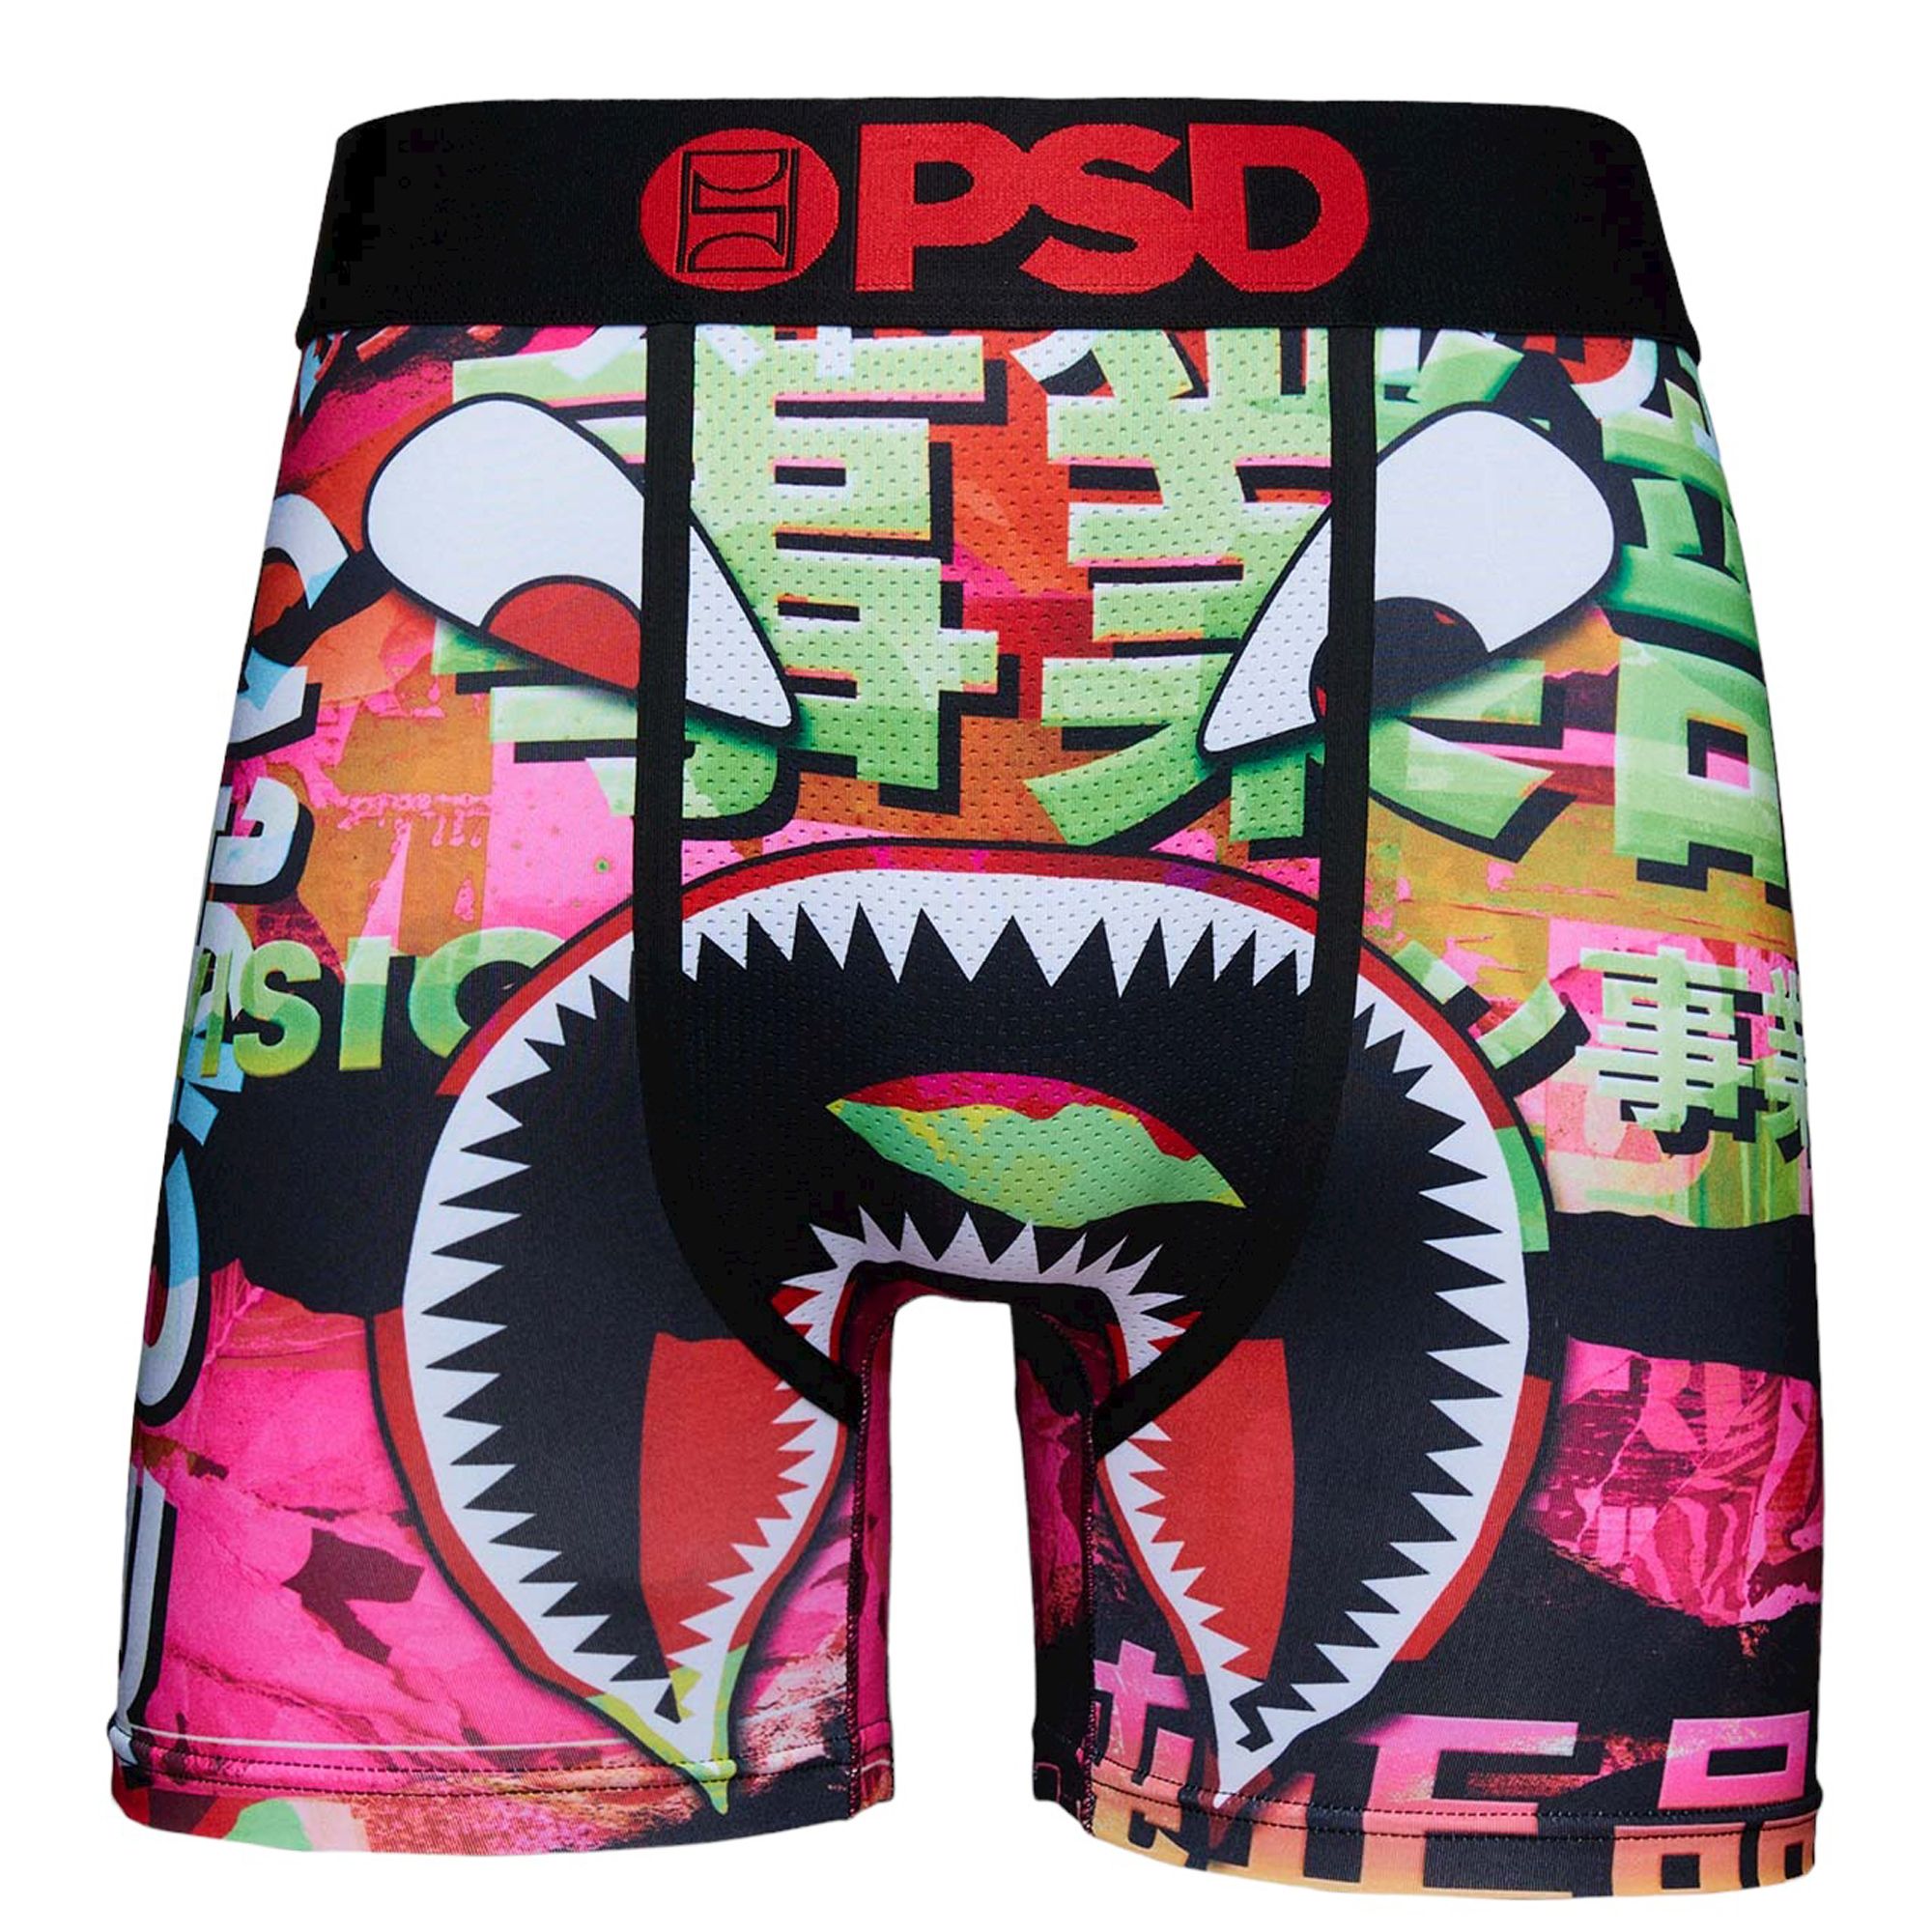 PSD Drippin' Money Stretch Boxer Briefs - Men's Boxers in Blue